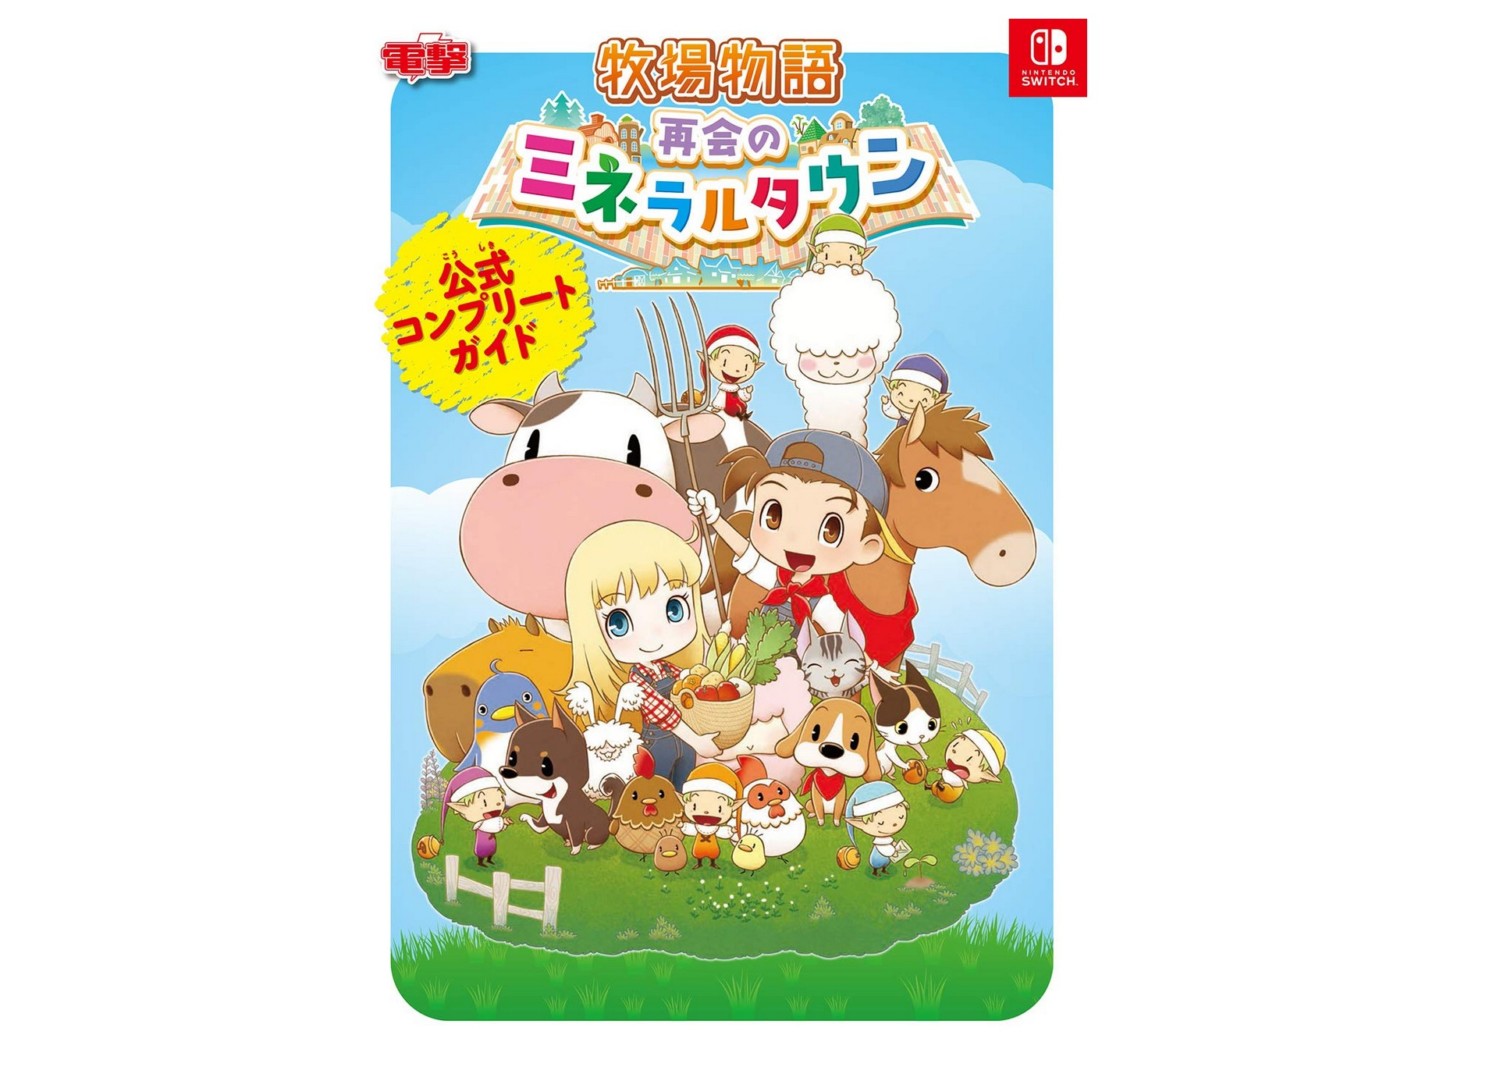 Mineral SEASONS: Announced Friends Town NintendoSoup OF STORY In Guidebook – of Japan